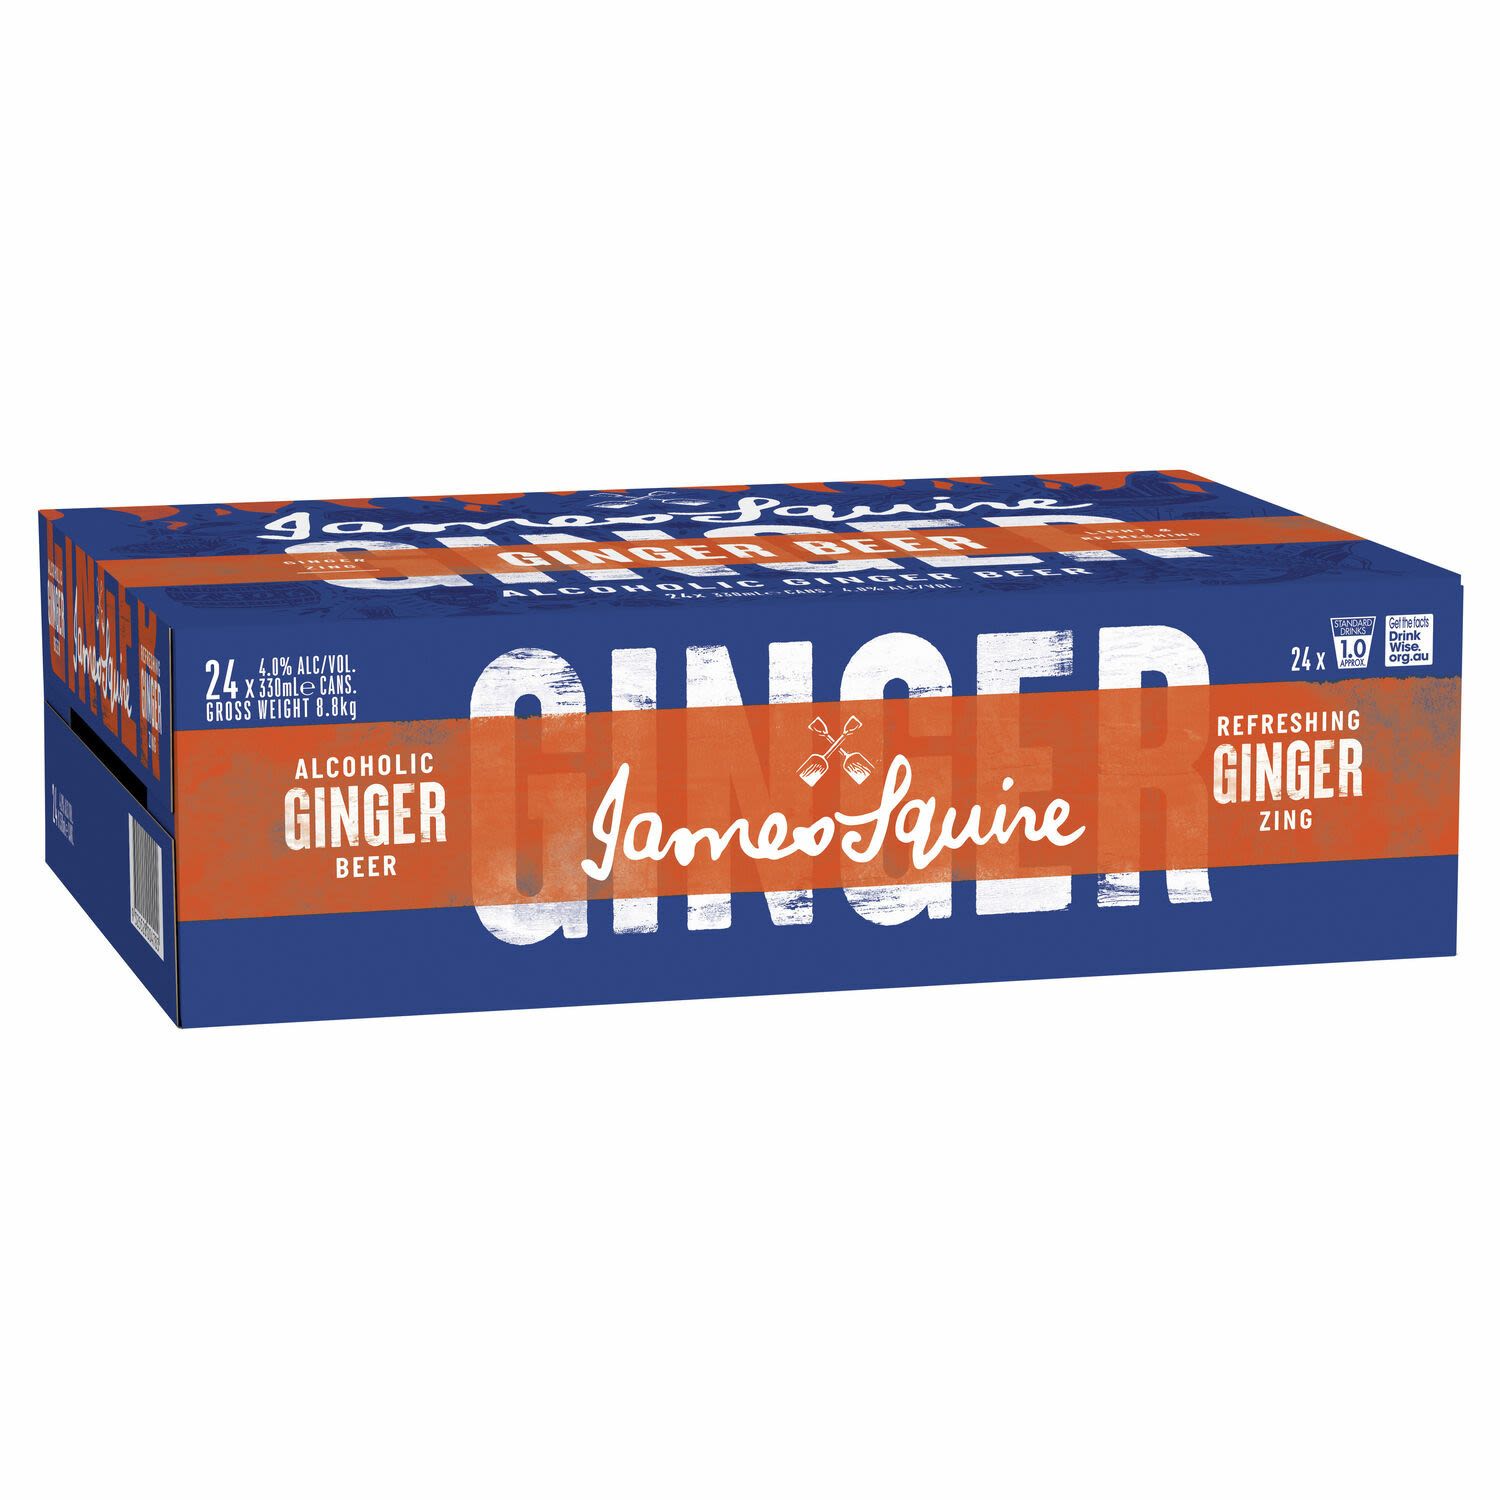 James Squire Ginger Beer has been carefully crafted with Australian ginger for a light, refreshing and zingy ginger taste. It can be enjoyed straight from the can or over ice with fresh lime.<br /> <br />Alcohol Volume: 4.00%<br /><br />Pack Format: 24 Pack<br /><br />Standard Drinks: 1</br /><br />Pack Type: Can<br /><br />Country of Origin: Australia<br />